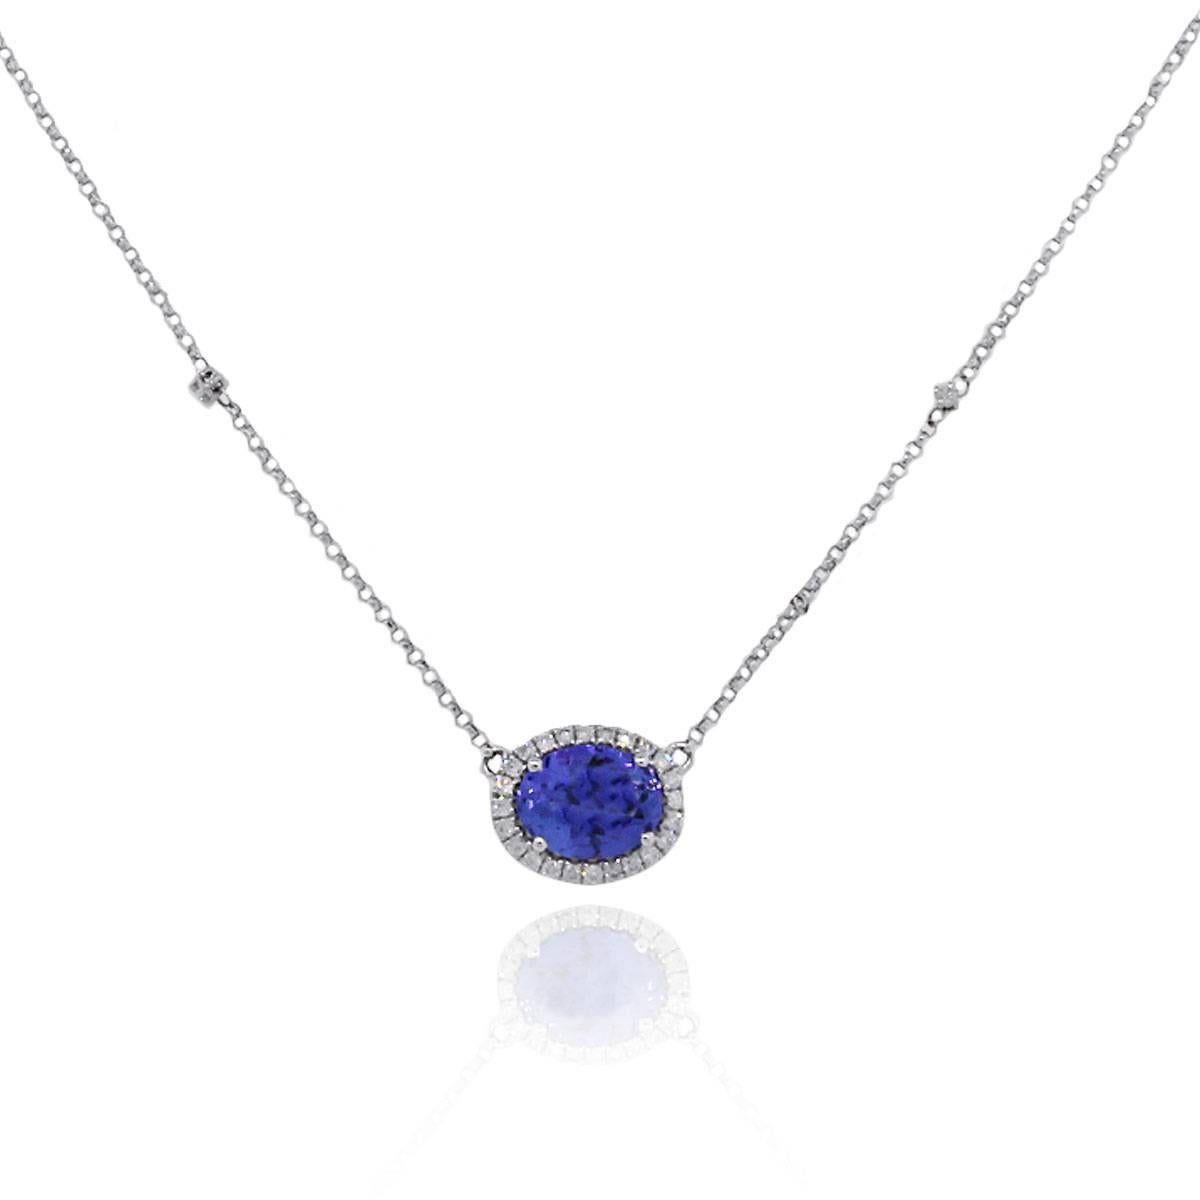 Material: 14k white gold
Diamond Details: Approximately 0.13ctw round brilliant diamonds. Diamonds are G/H in color and VS in clarity.
Gemstones Details: Approximately 1.61ctw oval tanzanite gemstone.
Pendant Measurements: 0.40″ x 0.20″ x